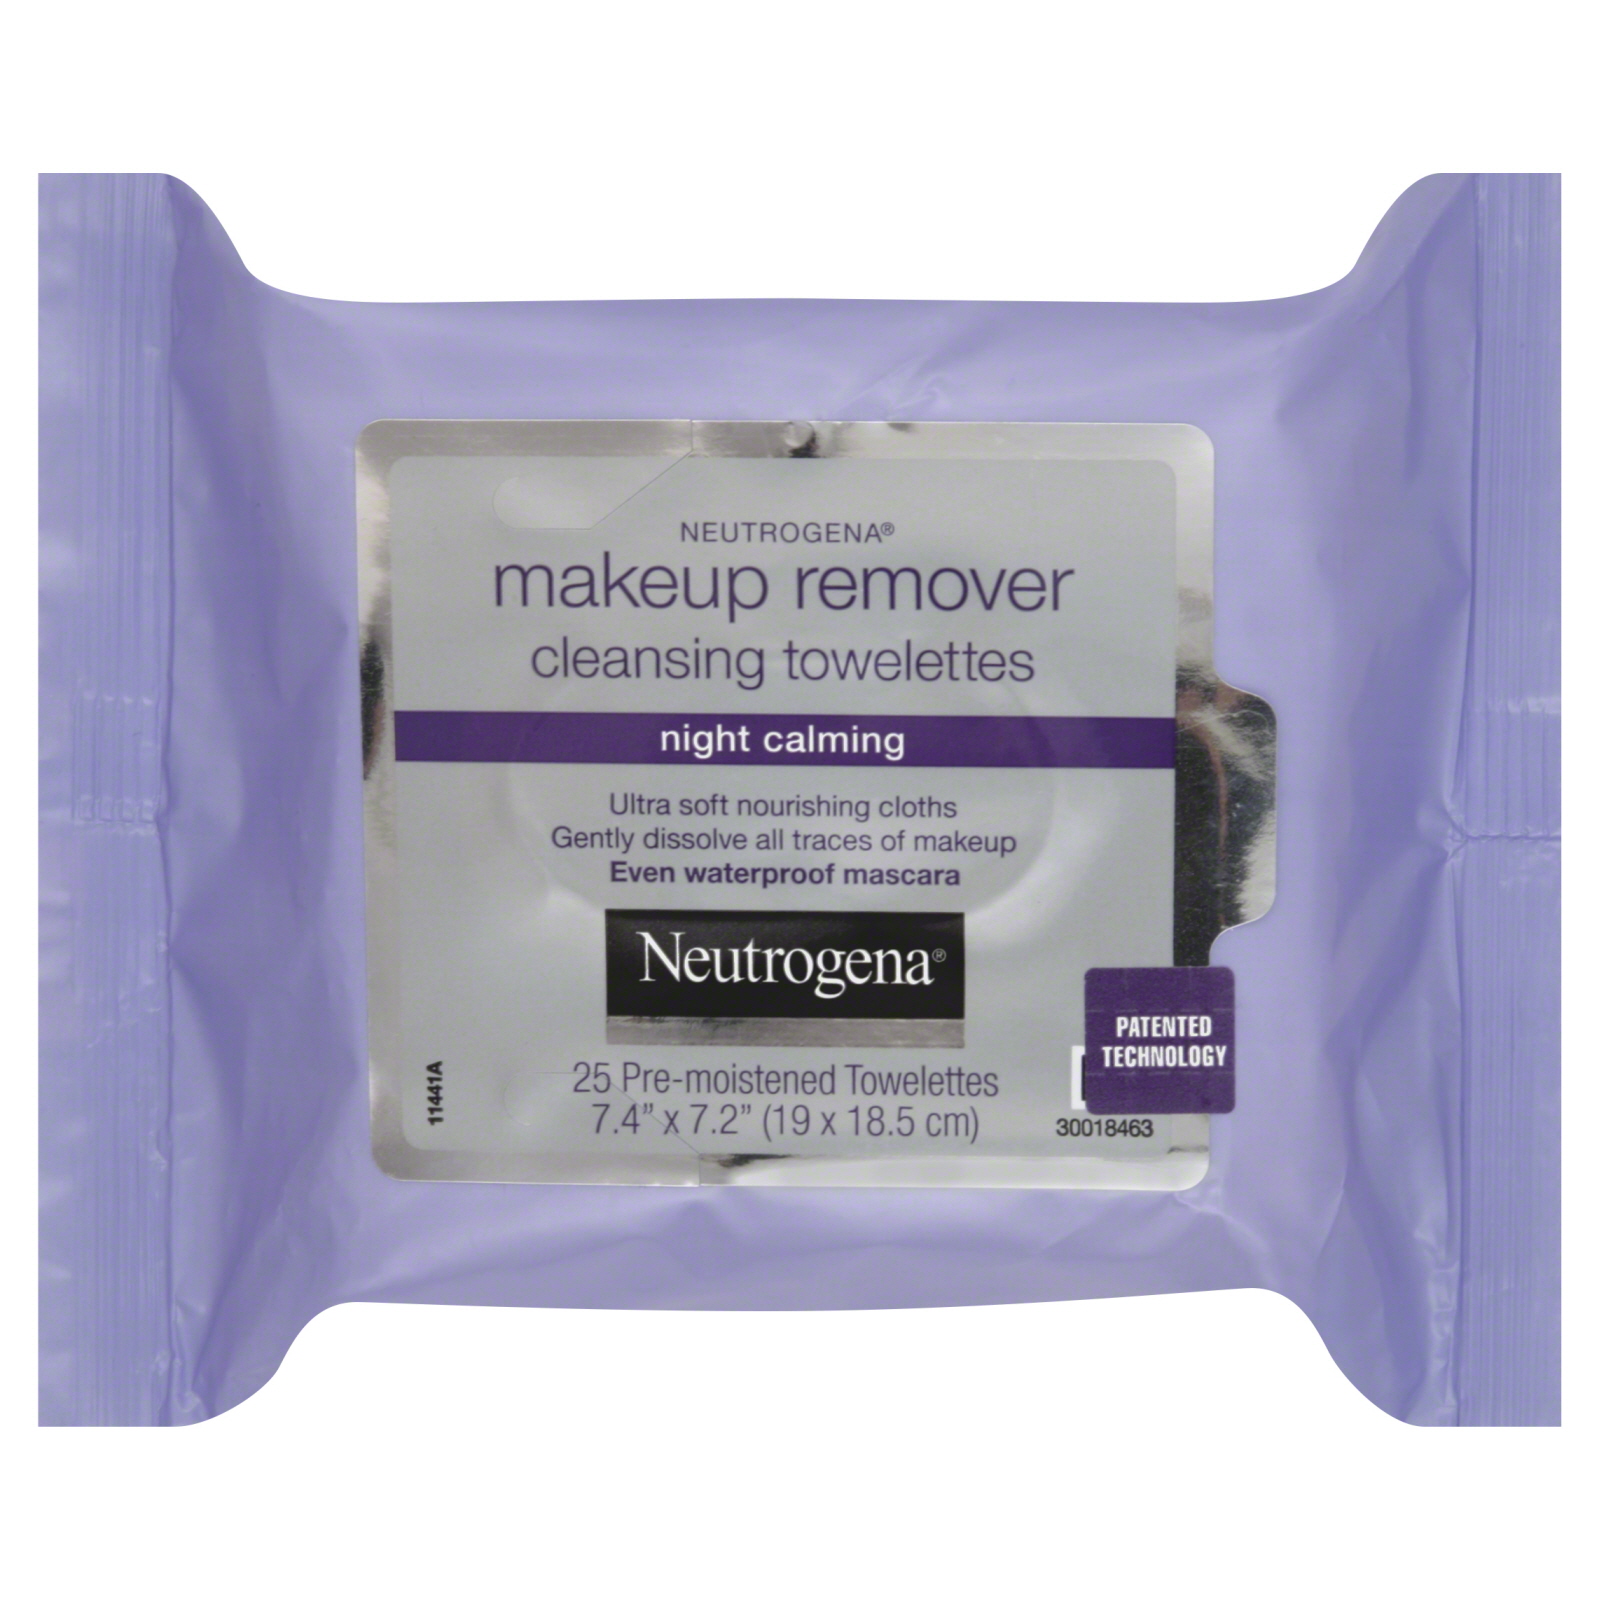 Neutrogena Cleansing Towelettes, Makeup Remover, Night Calming, 25 towelettes